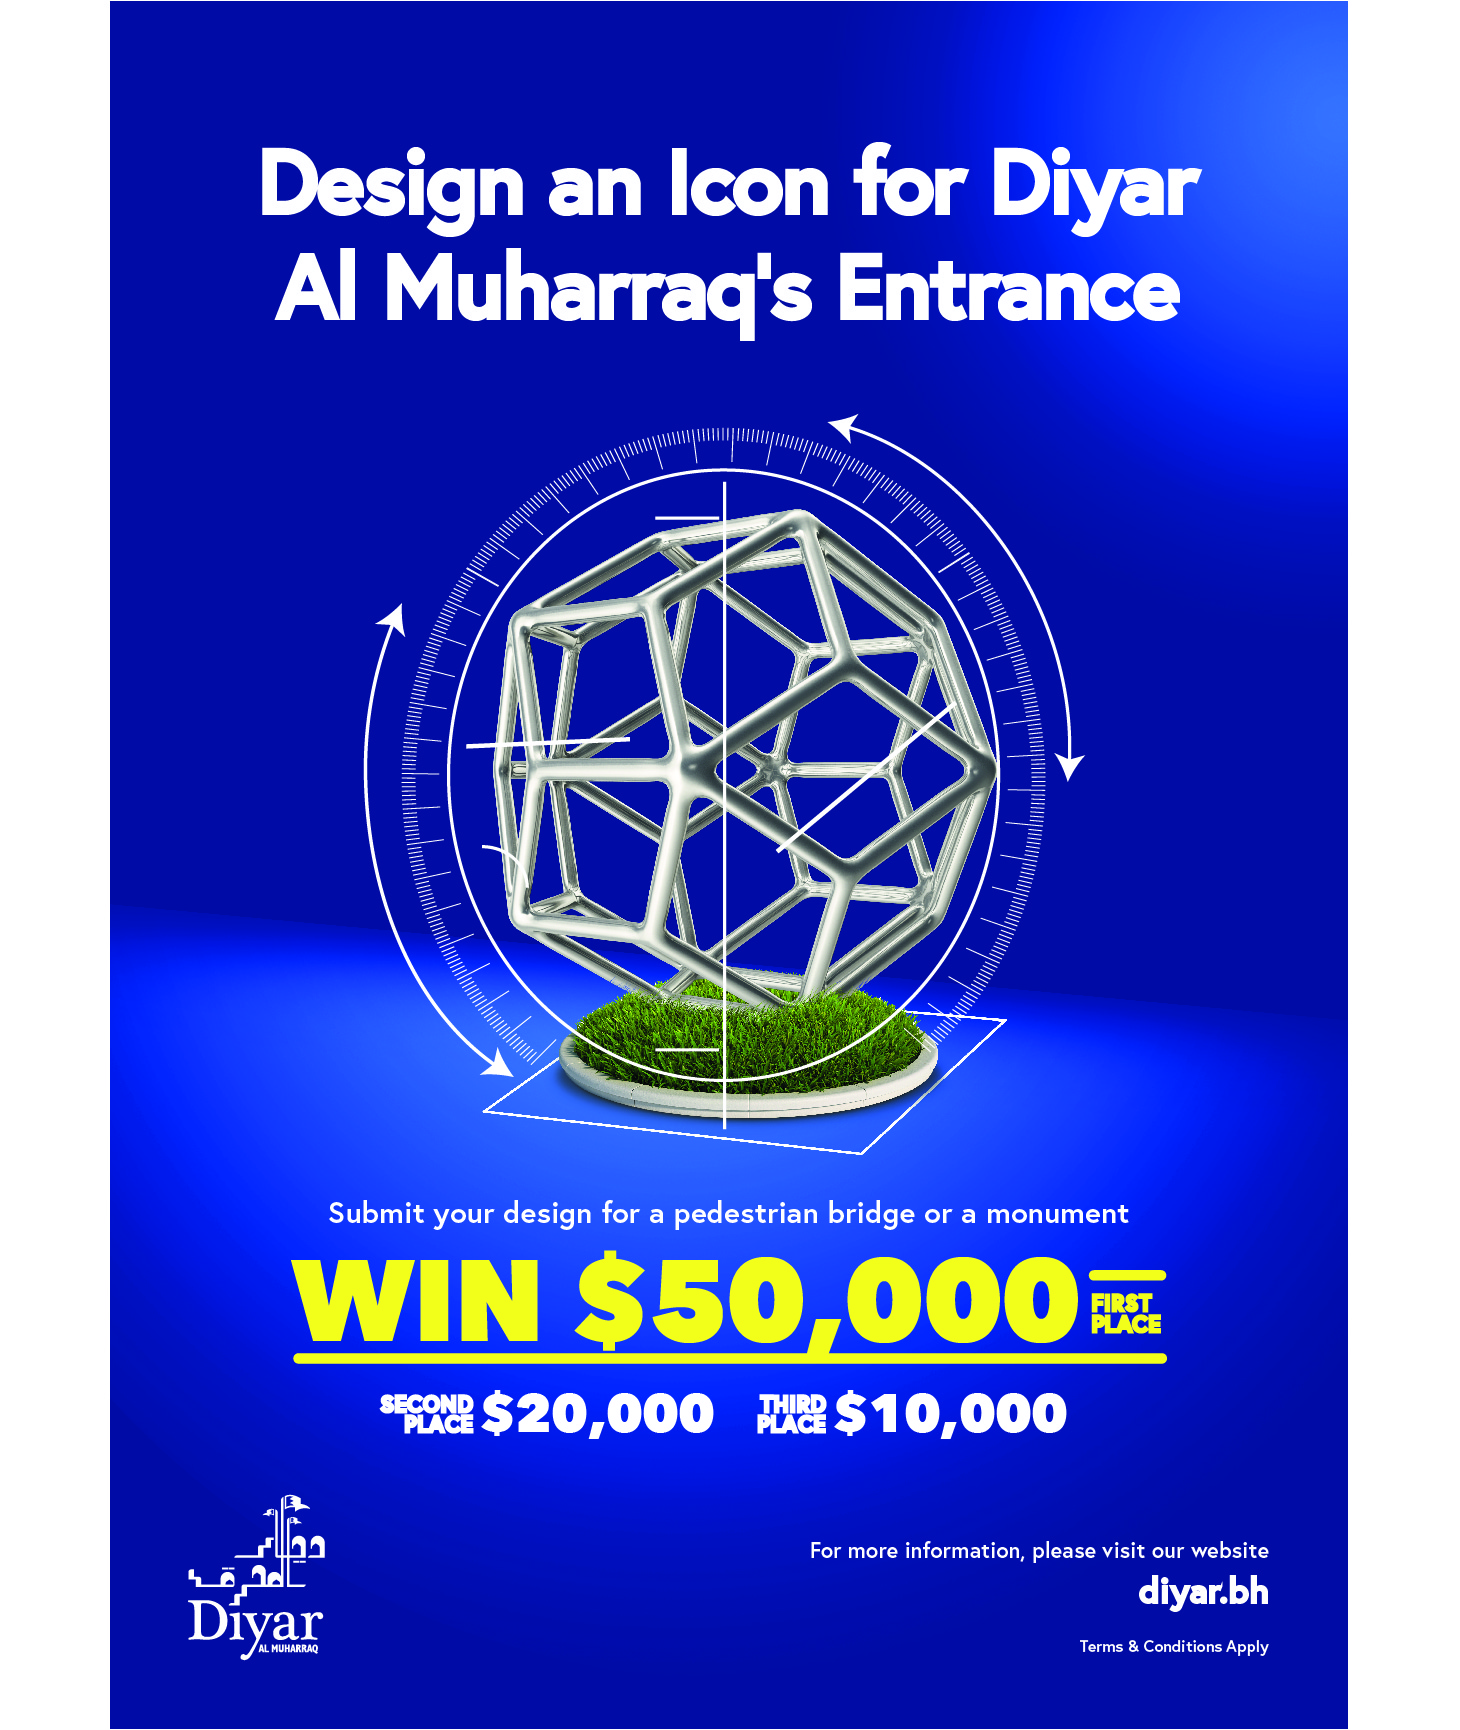 Diyar Al Muharraq Announces its Competition to Design an Architectural Landmark for the Entrance of the City